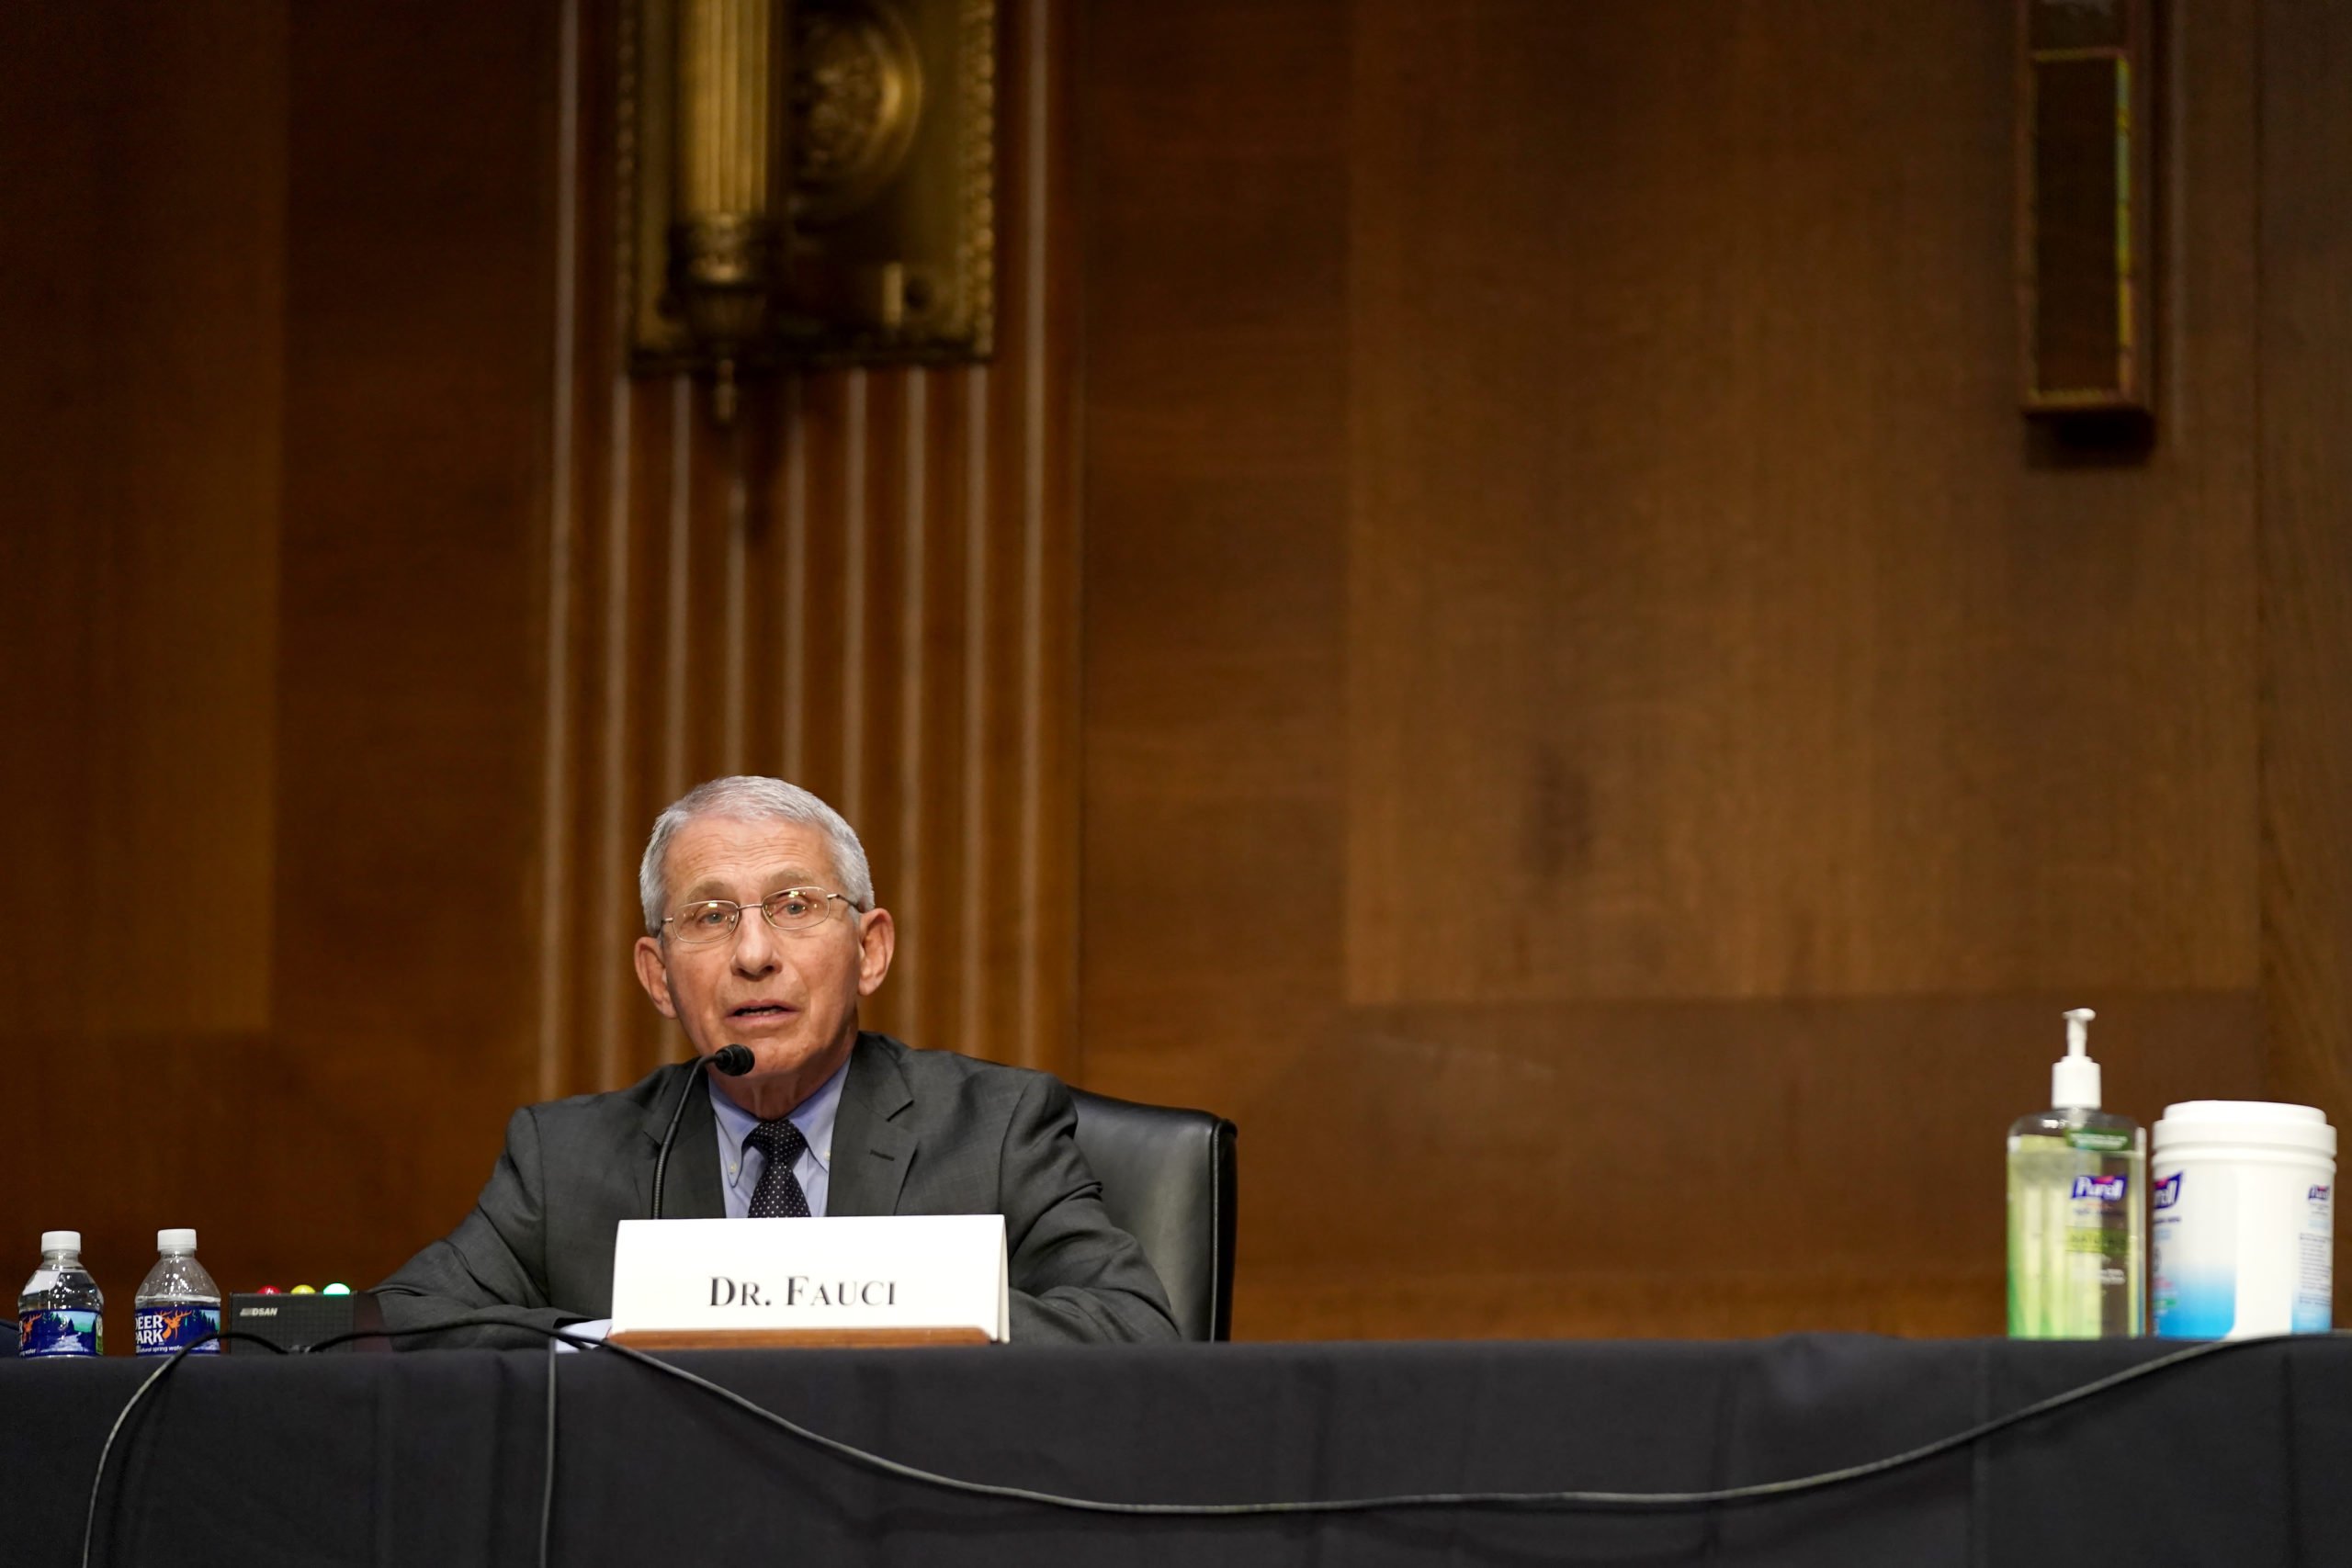 Dr. Anthony Fauci speaks during a Senate Health, Education, Labor and Pensions Committee hearing. (Photo by Greg Nash-Pool/Getty Images)